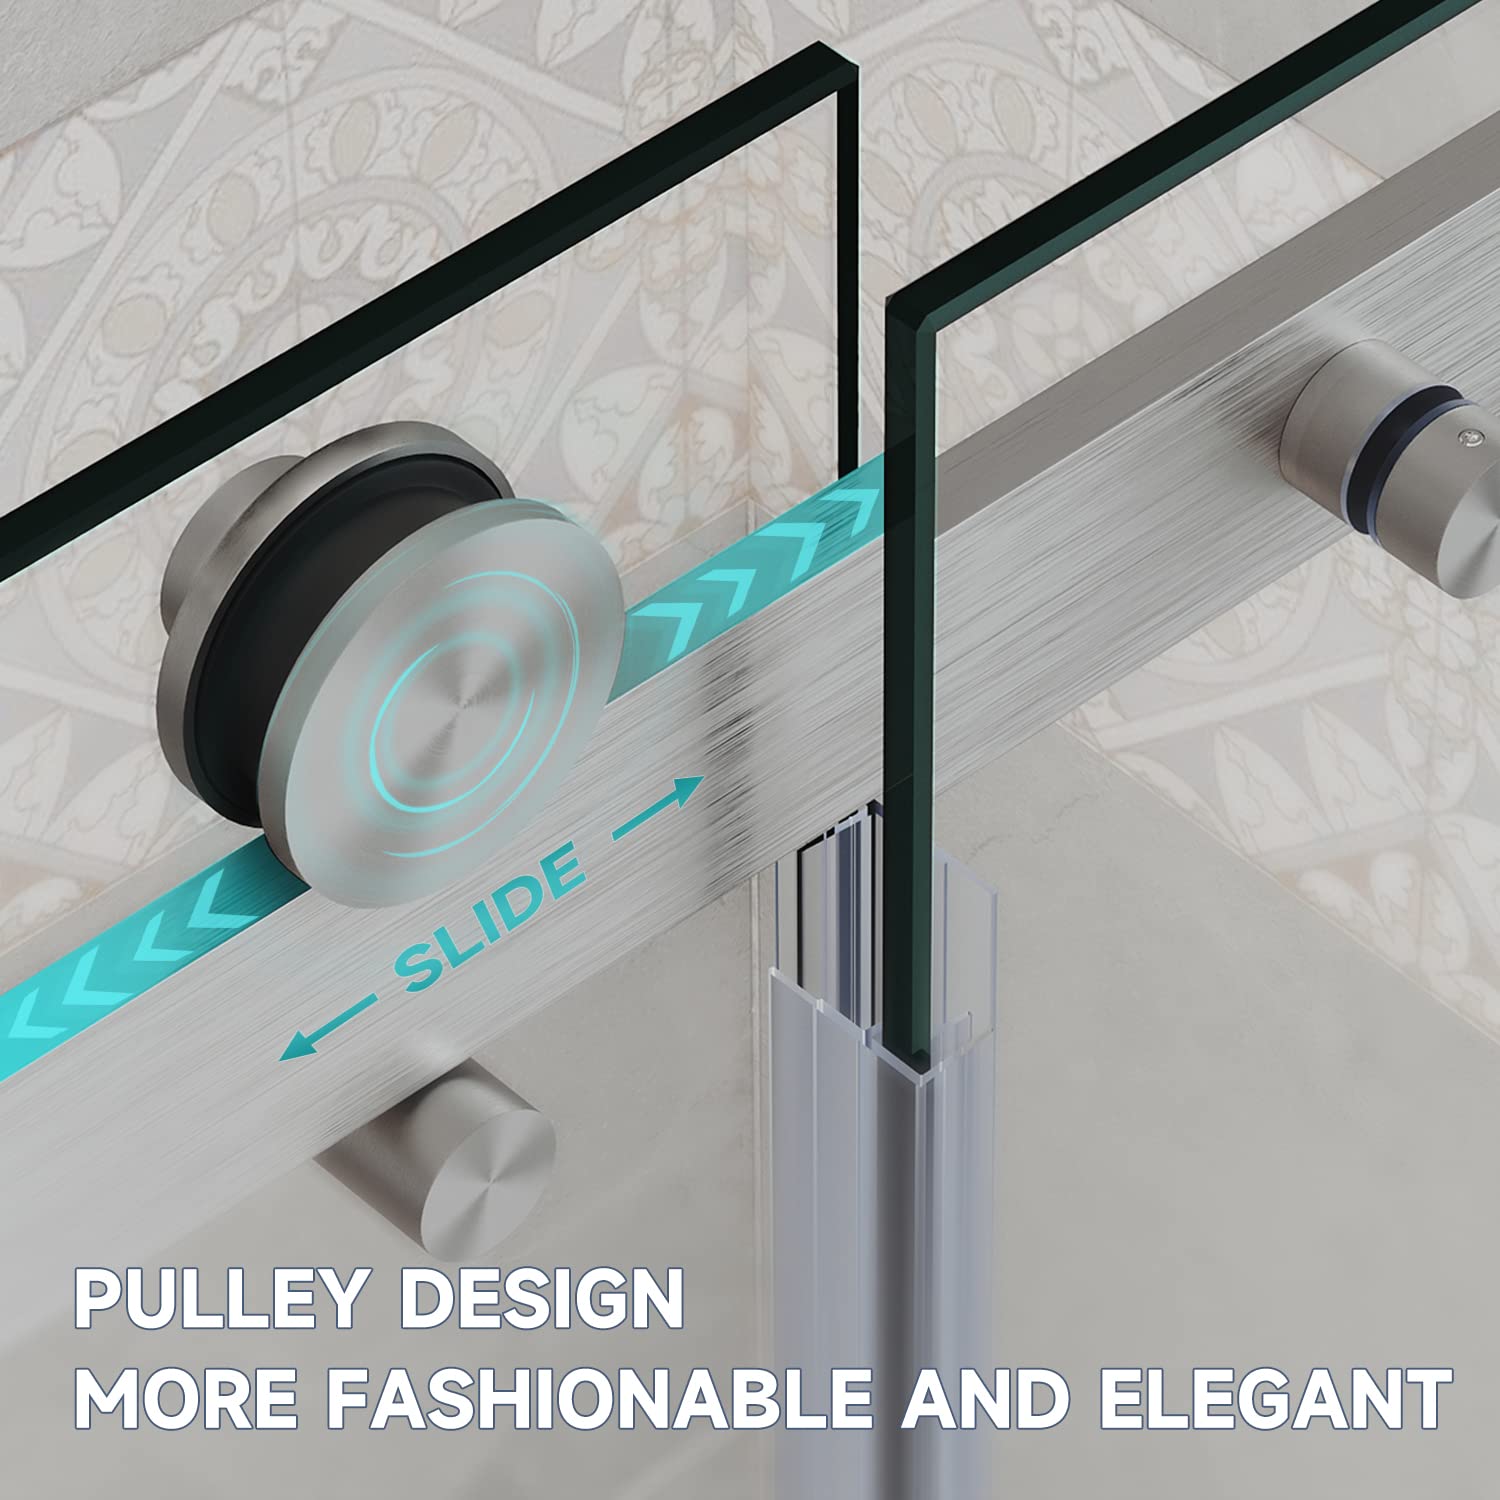 Pulley Design. More Fashionable And Elegant